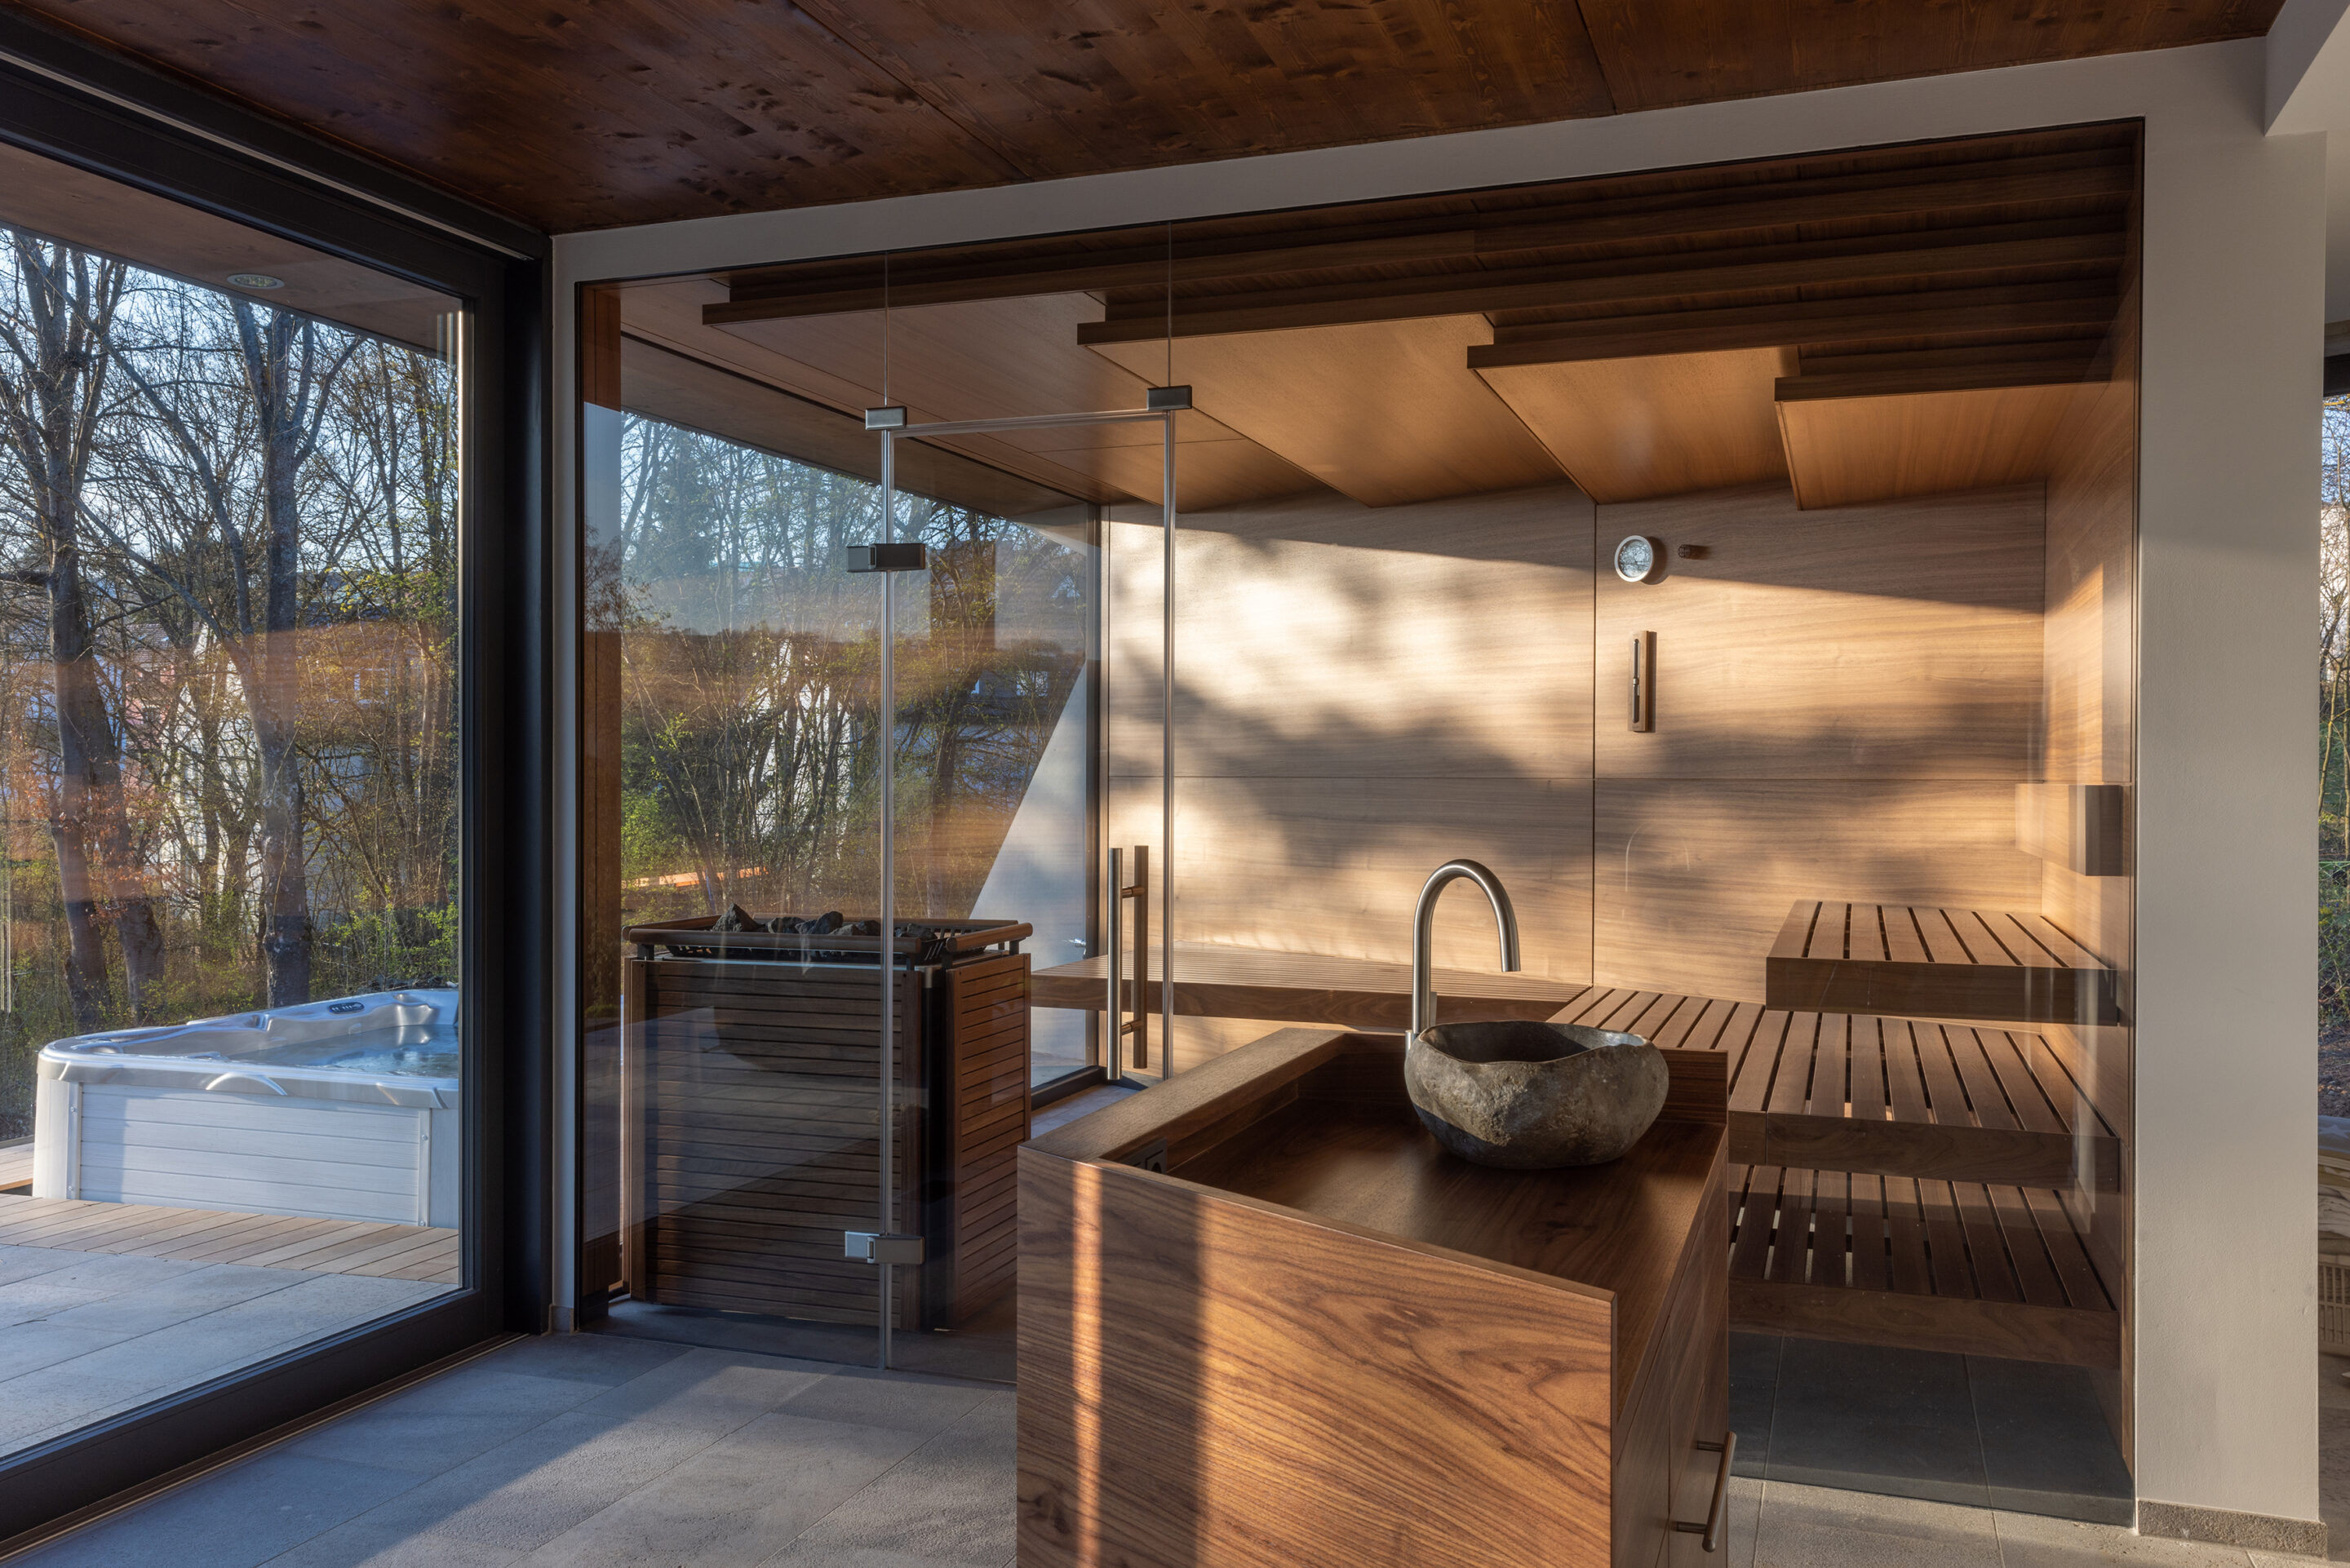 Take a look at this stunning wellness space created by KLAFS in Germany for a high-end residential property, in Arnstein, Germany.   Featuring an impressive steam bath, a soothing dark wood sauna, and a meditative anteroom, this wellness space offers the perfect environment to regenerate both body and mind. The client was looking for multi-functional, bespoke design, and quickly decided that KLAFS should be involved with the project planning and installation, together with the project architects and builders.  Experts at the KLAFS showroom in Schwäbische Hall, gave comprehensive guidance showed the client and architects the extensive range of KLAFS wellness products and accessories. A sauna with a view  Following the consultation with the KLAFS team, the clients settled on a high-quality, individually designed KLAFS Sauna PROFI. The customised cabin was installed in a solid walnut finish. The KLAFS Sauna features a large glass front, giving a panoramic view of the client’s stunning garden space. With plenty of natural light during the day and warm indirect LED lighting at night, this wellness space was built to offer a soothing atmosphere around the clock. Whilst the dark American walnut of the sauna lends a cosy, comfortable atmosphere, the generous panorama window provides transparency and lightness. This contrasting interplay makes the sauna a spacious, light, and airy oasis of relaxation, which loses none of its feeling of security thanks to the warmth and natural beauty of the wooden walls and benches. The cabin’s benches, with their concealed mountings, give the appearance of floating and are a design highlight of this bespoke wellness project, complimented by the stepped ceiling.      Opulent steam bath design    A testimony to the meticulous planning and craftsmanship of this project can be found in the steam bath which adjoins the sauna, and was built into a beautiful, domed room. The entire steam room is fitted with luxury golden-brown Bisazza mosaic tiles and features a gold recess. The curves of the seating area and the recess posed a particular challenge for the builders - and the effort was more than worth it. The stylish and harmonious design helps to give every user of this steam bath a unique and soothing experience. Atmospheric sauna lighting and a 'starlit' steam room  In addition to natural daylight, the sauna features indirect LED lighting on the backrest, which complements the perfectly coordinated lighting concept and creates the right atmosphere for every mood.  The interior of the sauna and the relaxation area are designed with matching material, creating a harmonious effect between the two wellness spaces. The relaxation area (anteroom) is equipped with gentle, atmospheric light sources and offers the ideal atmosphere to simply unwind after a relaxing sauna bath.  The unique steam bath space is complemented by the sparkling filigree stars of the POLAR STARRY HEAVEN design installed on the ceiling, combined with gentle, indirect LED lighting. Guncast offers several lighting options for your wellness area and can even account for spaces with low levels of natural light with solutions such as Sun Meadow UV Lighting. Find out more about by contacting our design team.           Talk to Guncast about professional and home wellness projects  The KLAFS team worked with a team of architects and builders to create this relaxation oasis. Guncast also works closely with architects, property developers, and project managers, to create stunning swimming pools and wellness projects for domestic or commercial properties. We supply KLAFS turnkey and bespoke designed saunas, steam rooms, and wellness products to help you create your own exclusive oasis, designed, and built to suit your clients’ space. Contact the Guncast team or make an appointment to visit the Manchester showroom. 